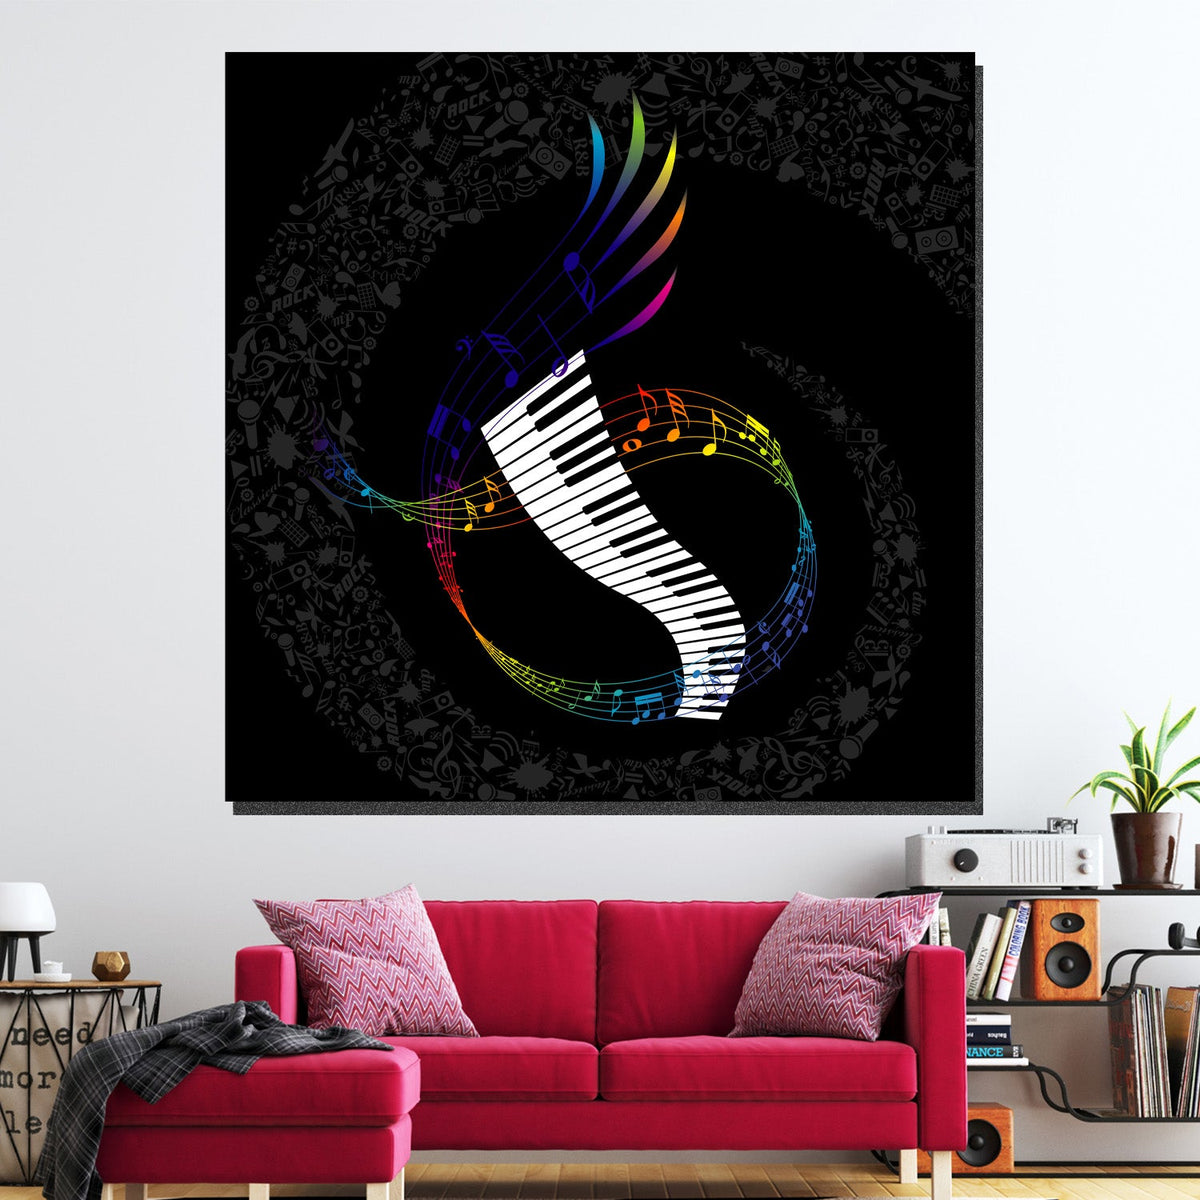 https://cdn.shopify.com/s/files/1/0387/9986/8044/products/ColourfulMusicalCollageCanvasArtprintStretched-1.jpg